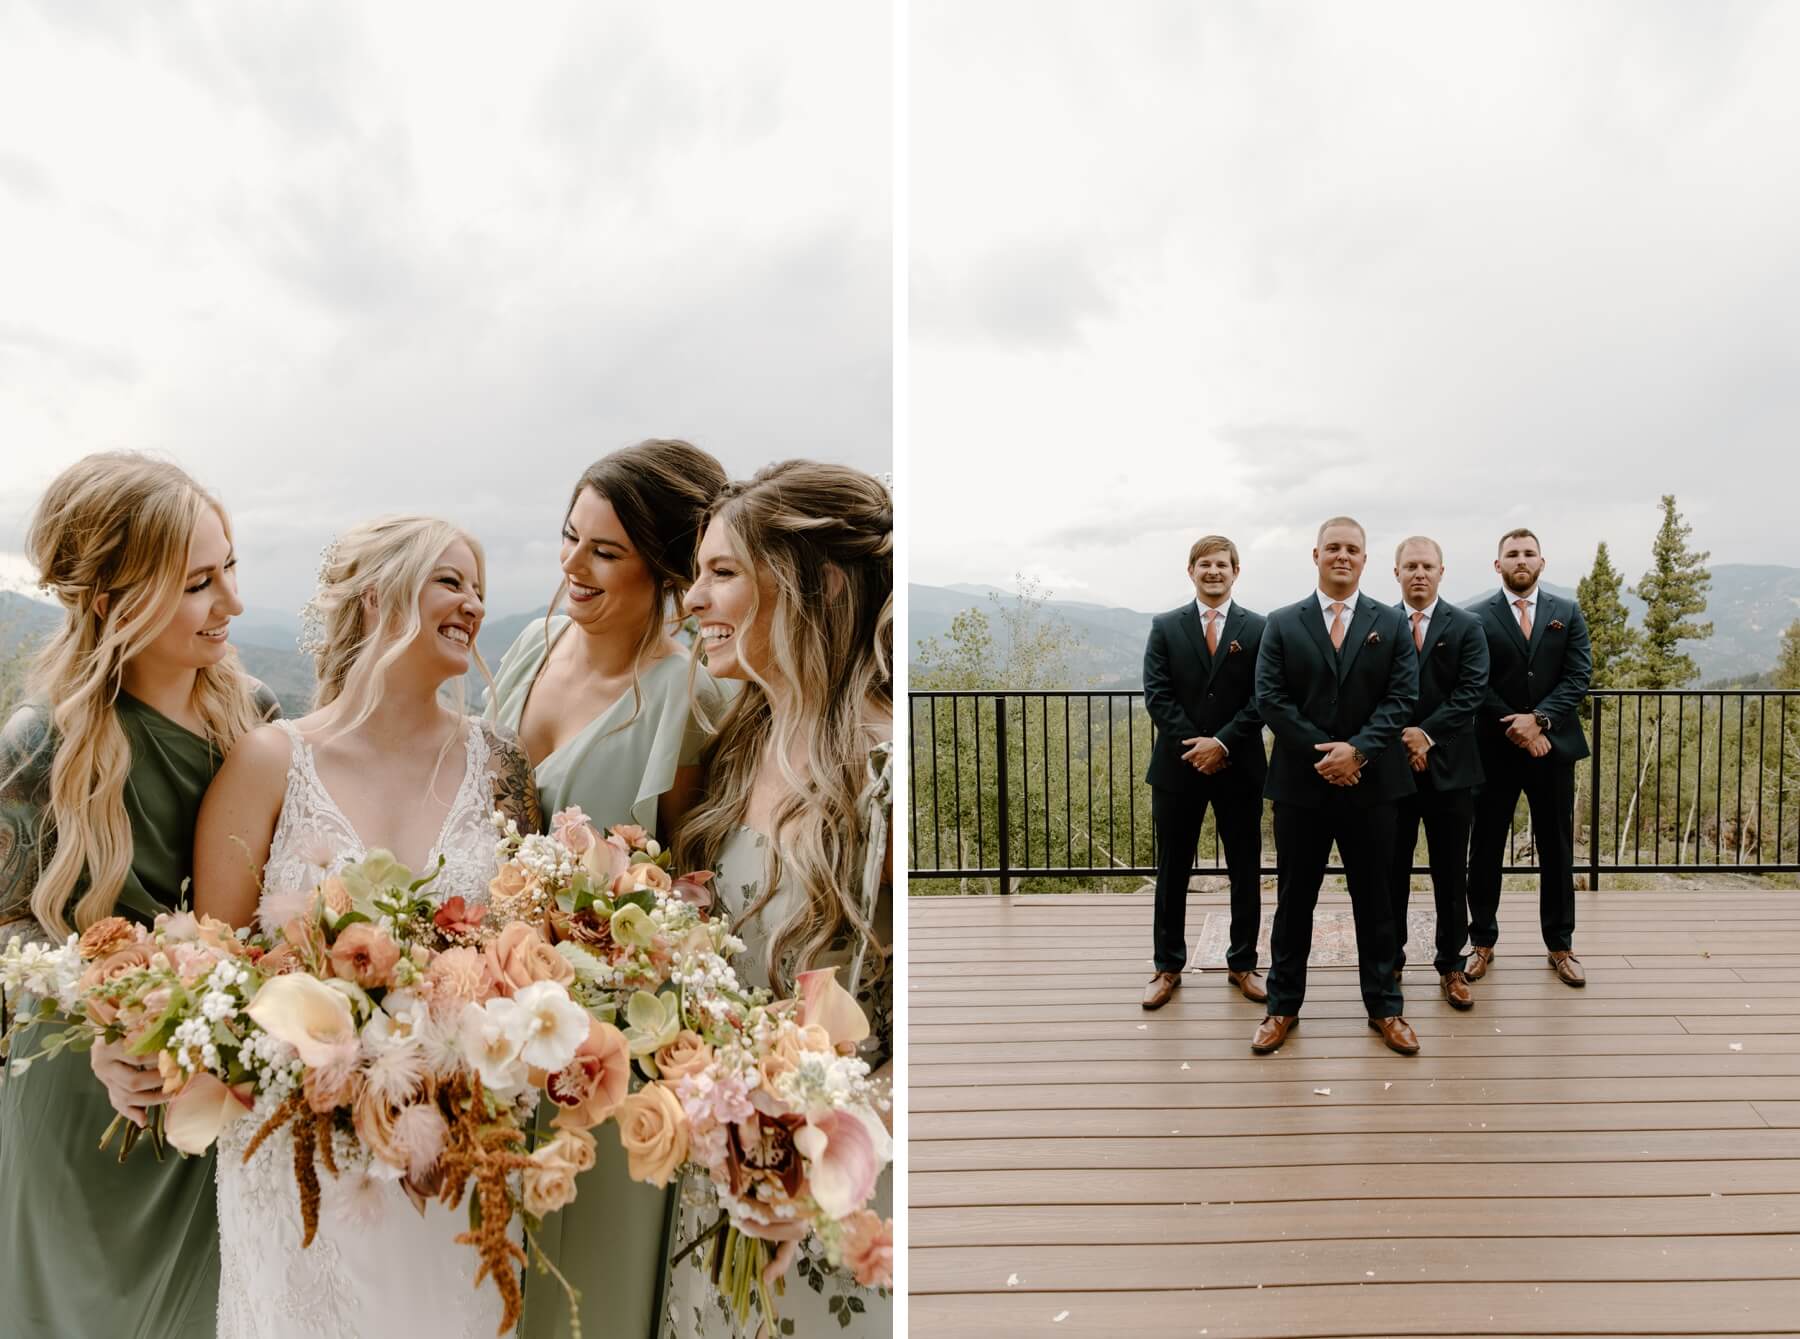 Bride laughing with bridesmaids at Idaho Springs wedding ceremony | groom standing with groomsmen on deck at North Star Gatherings | McArthur Weddings and Events